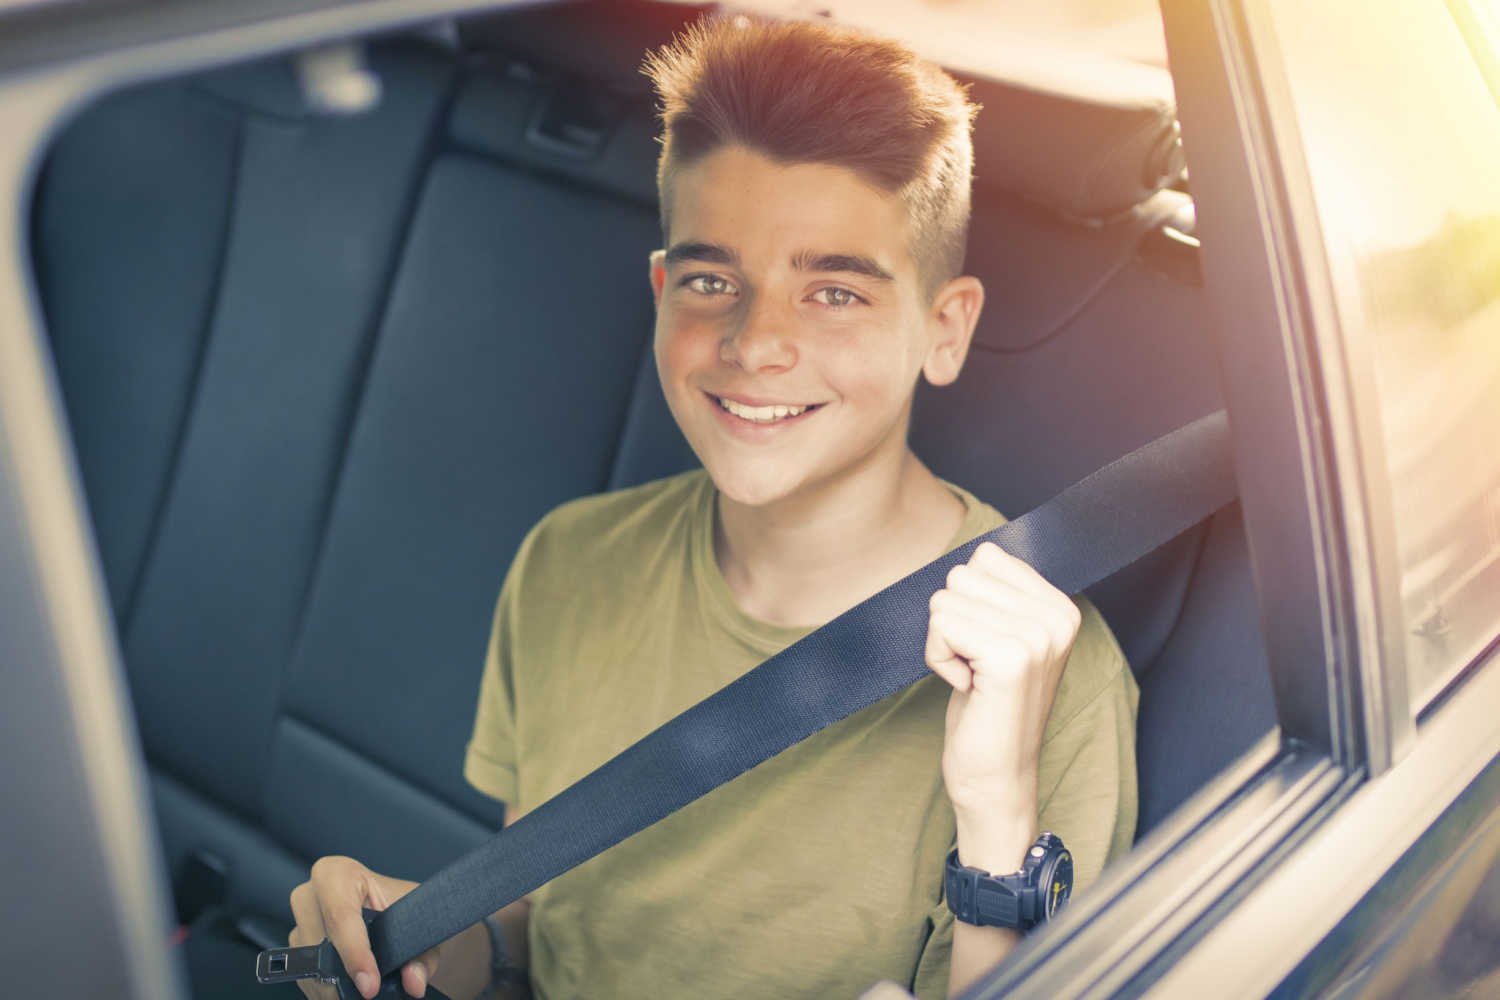 Tips While Travelling With Kids in Cars